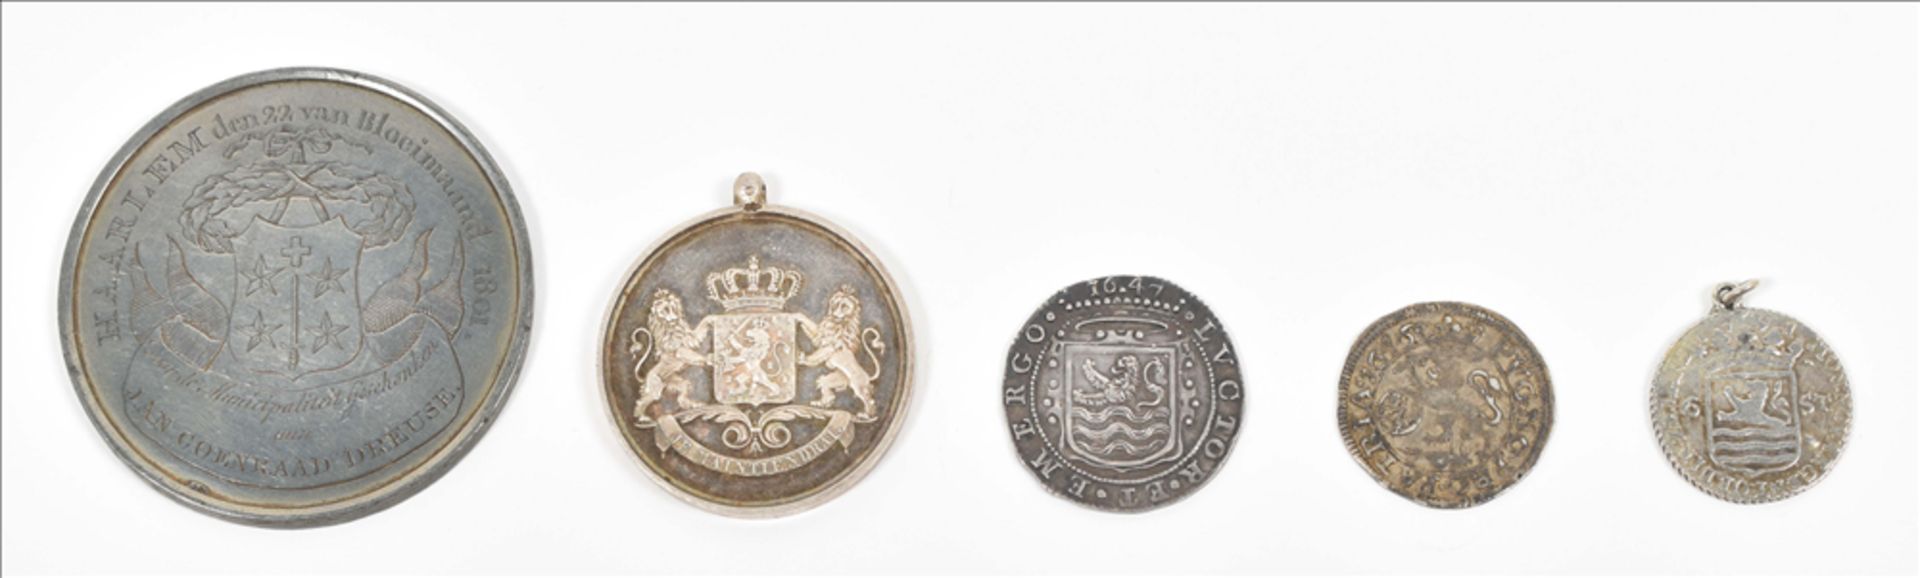 Five Dutch coins and medals